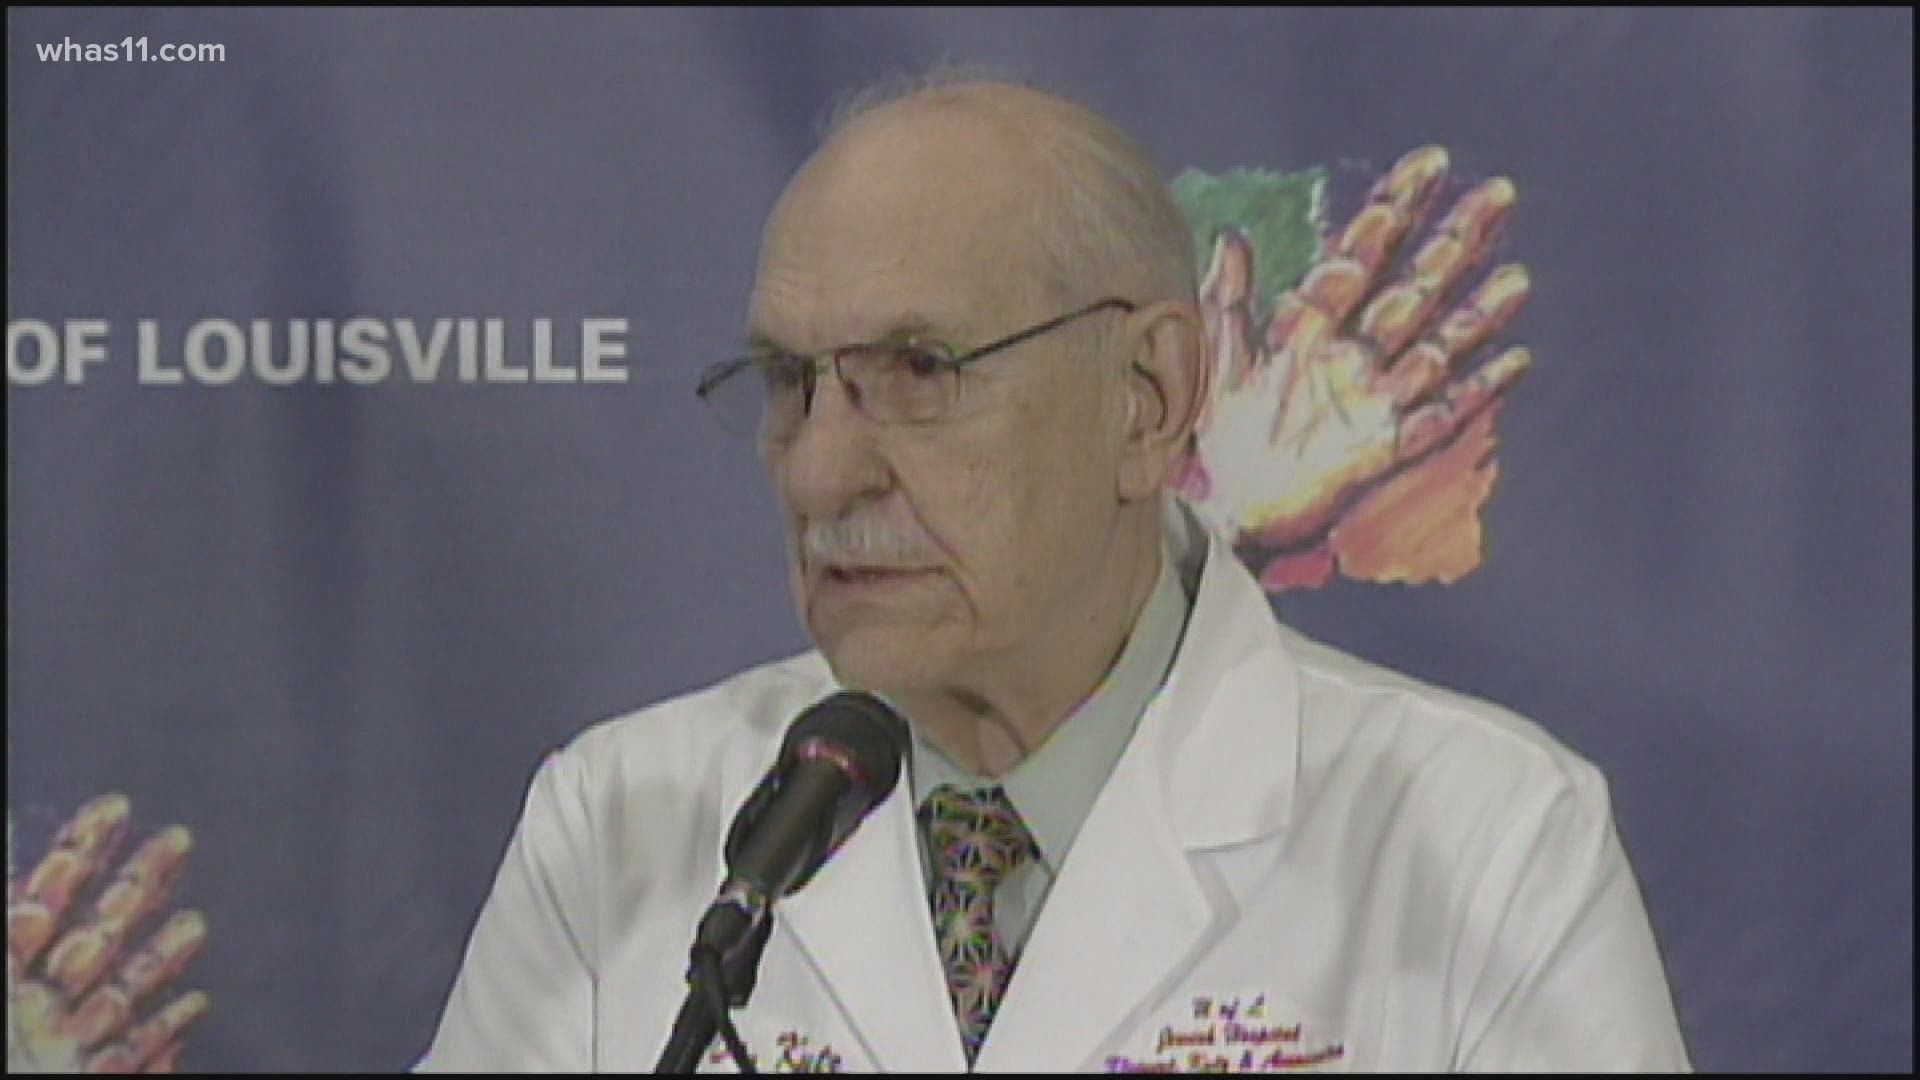 Dr. Joseph Kutz passed away at the age of 92 on Saturday. Dr. Kutz helped perform the world’s first successful hand transplant in 1999.